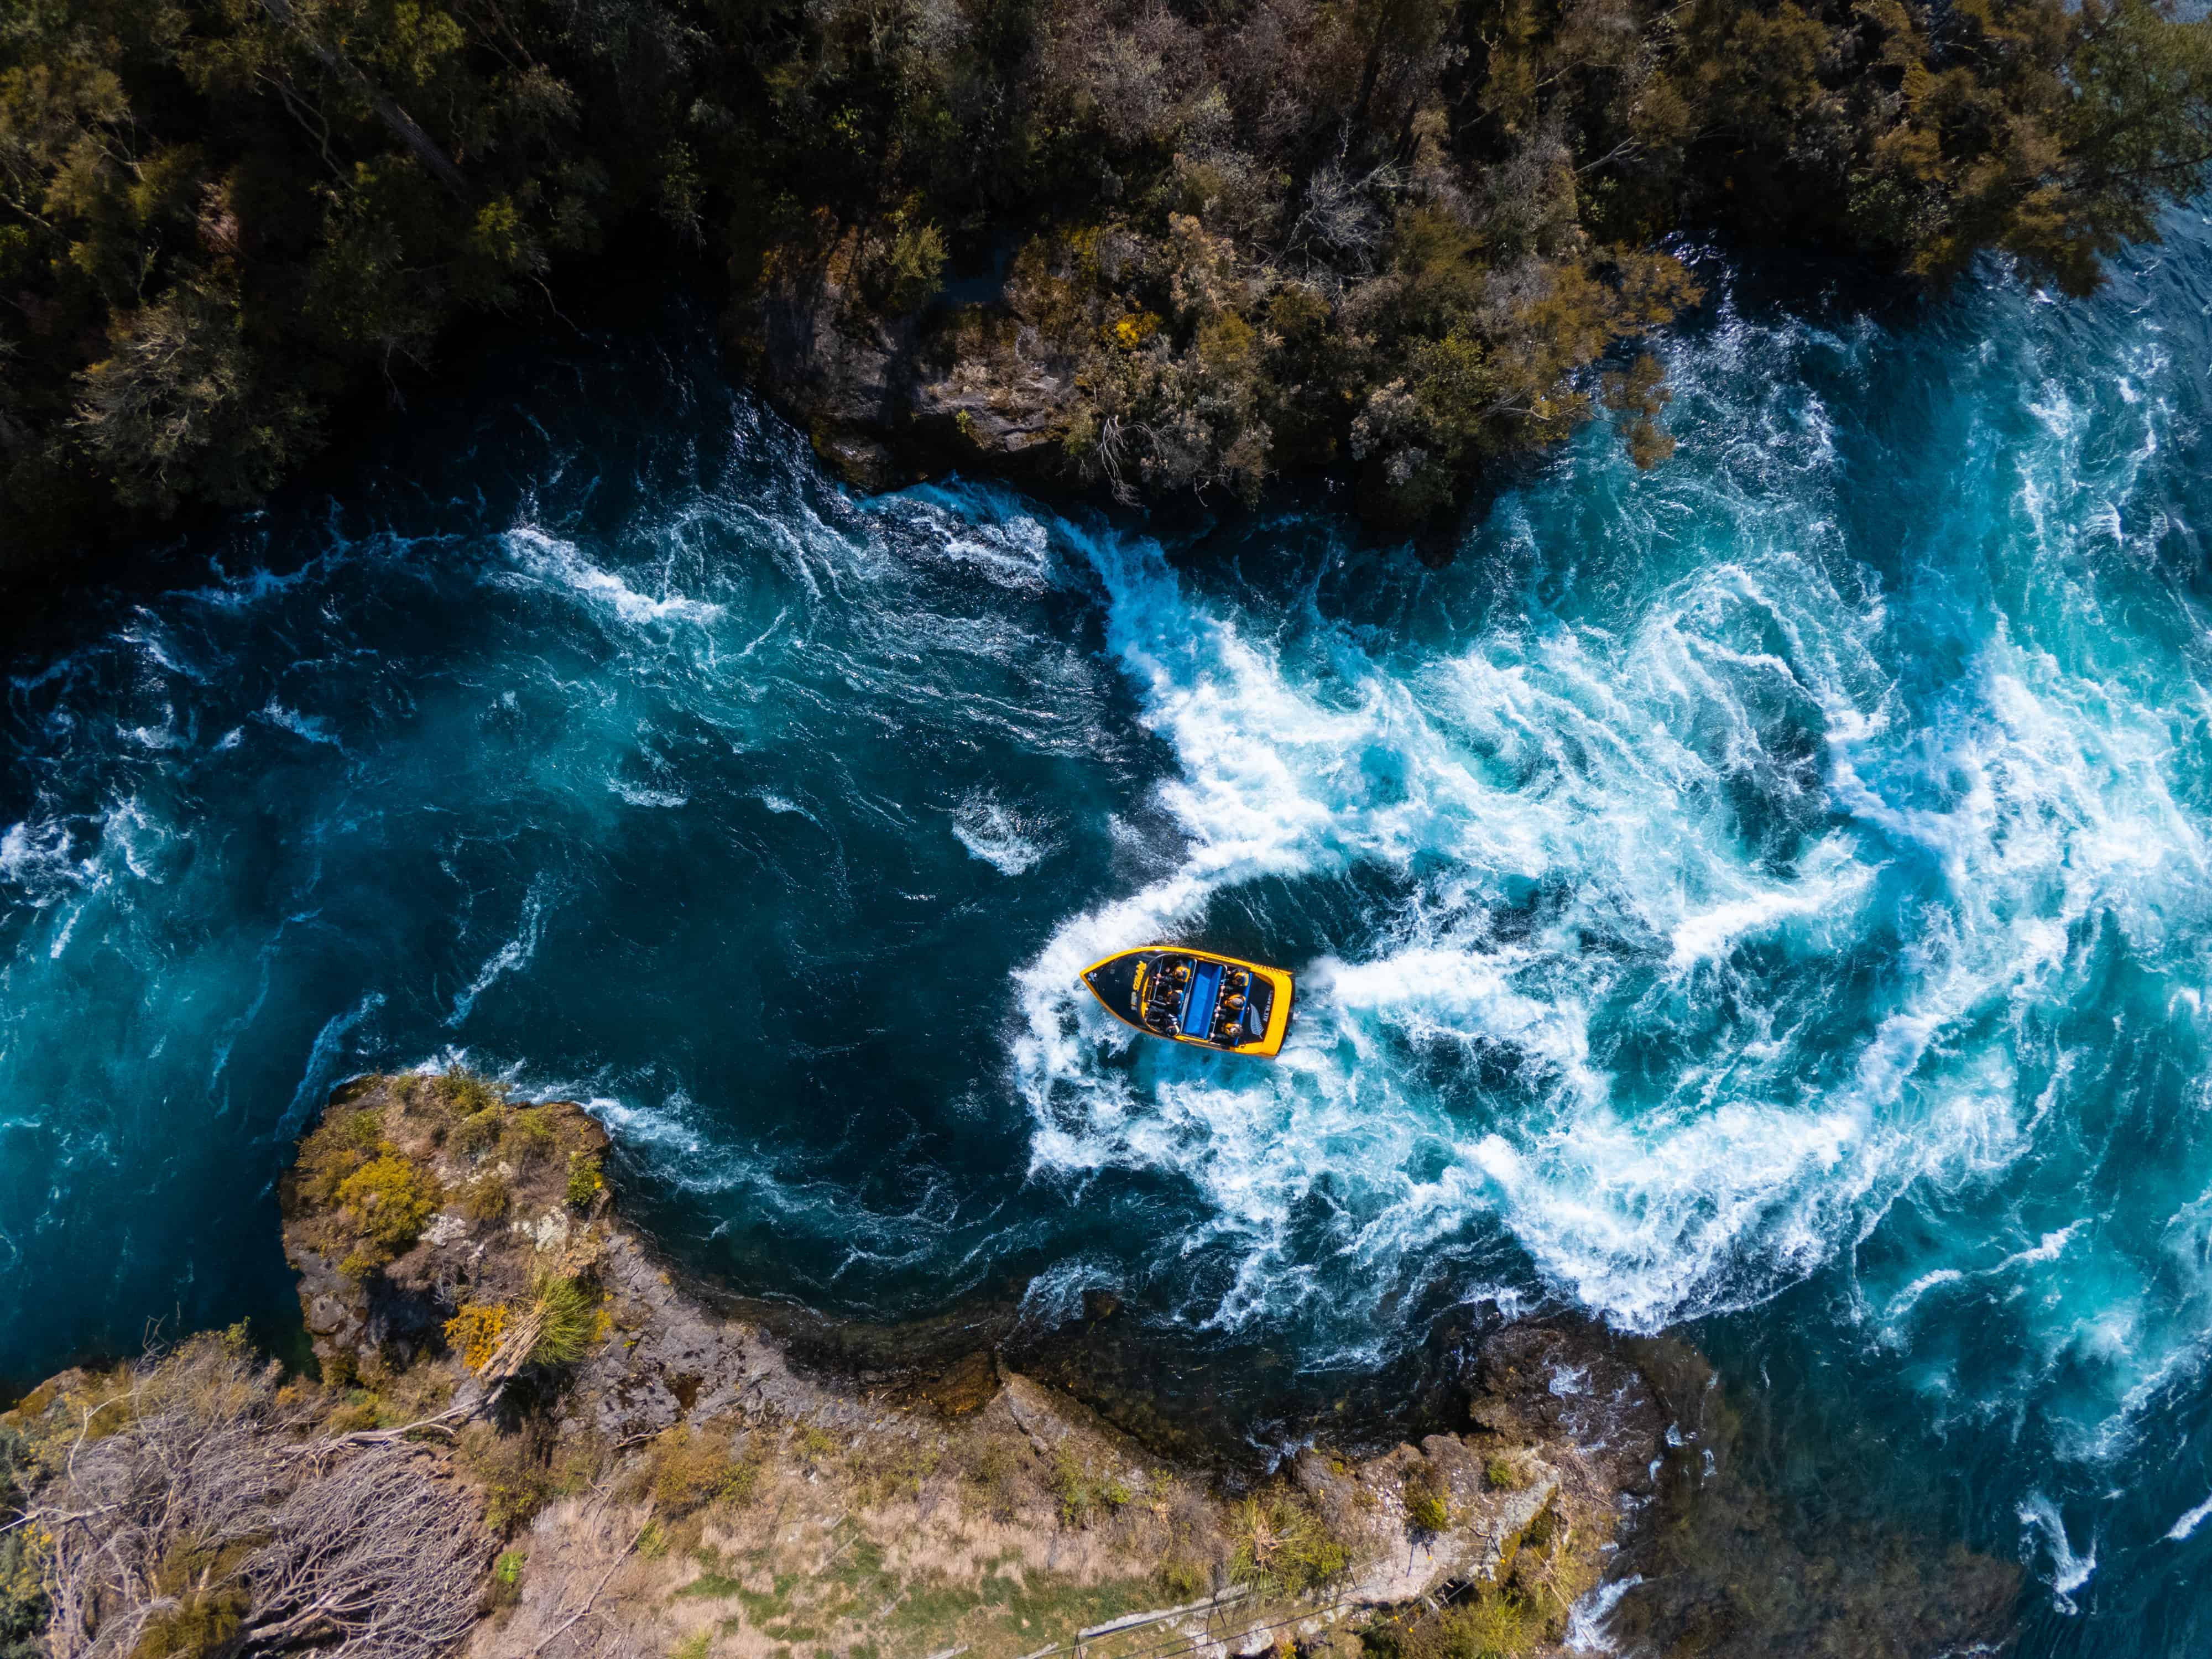 The power of the mighty Waikato River, Taupo